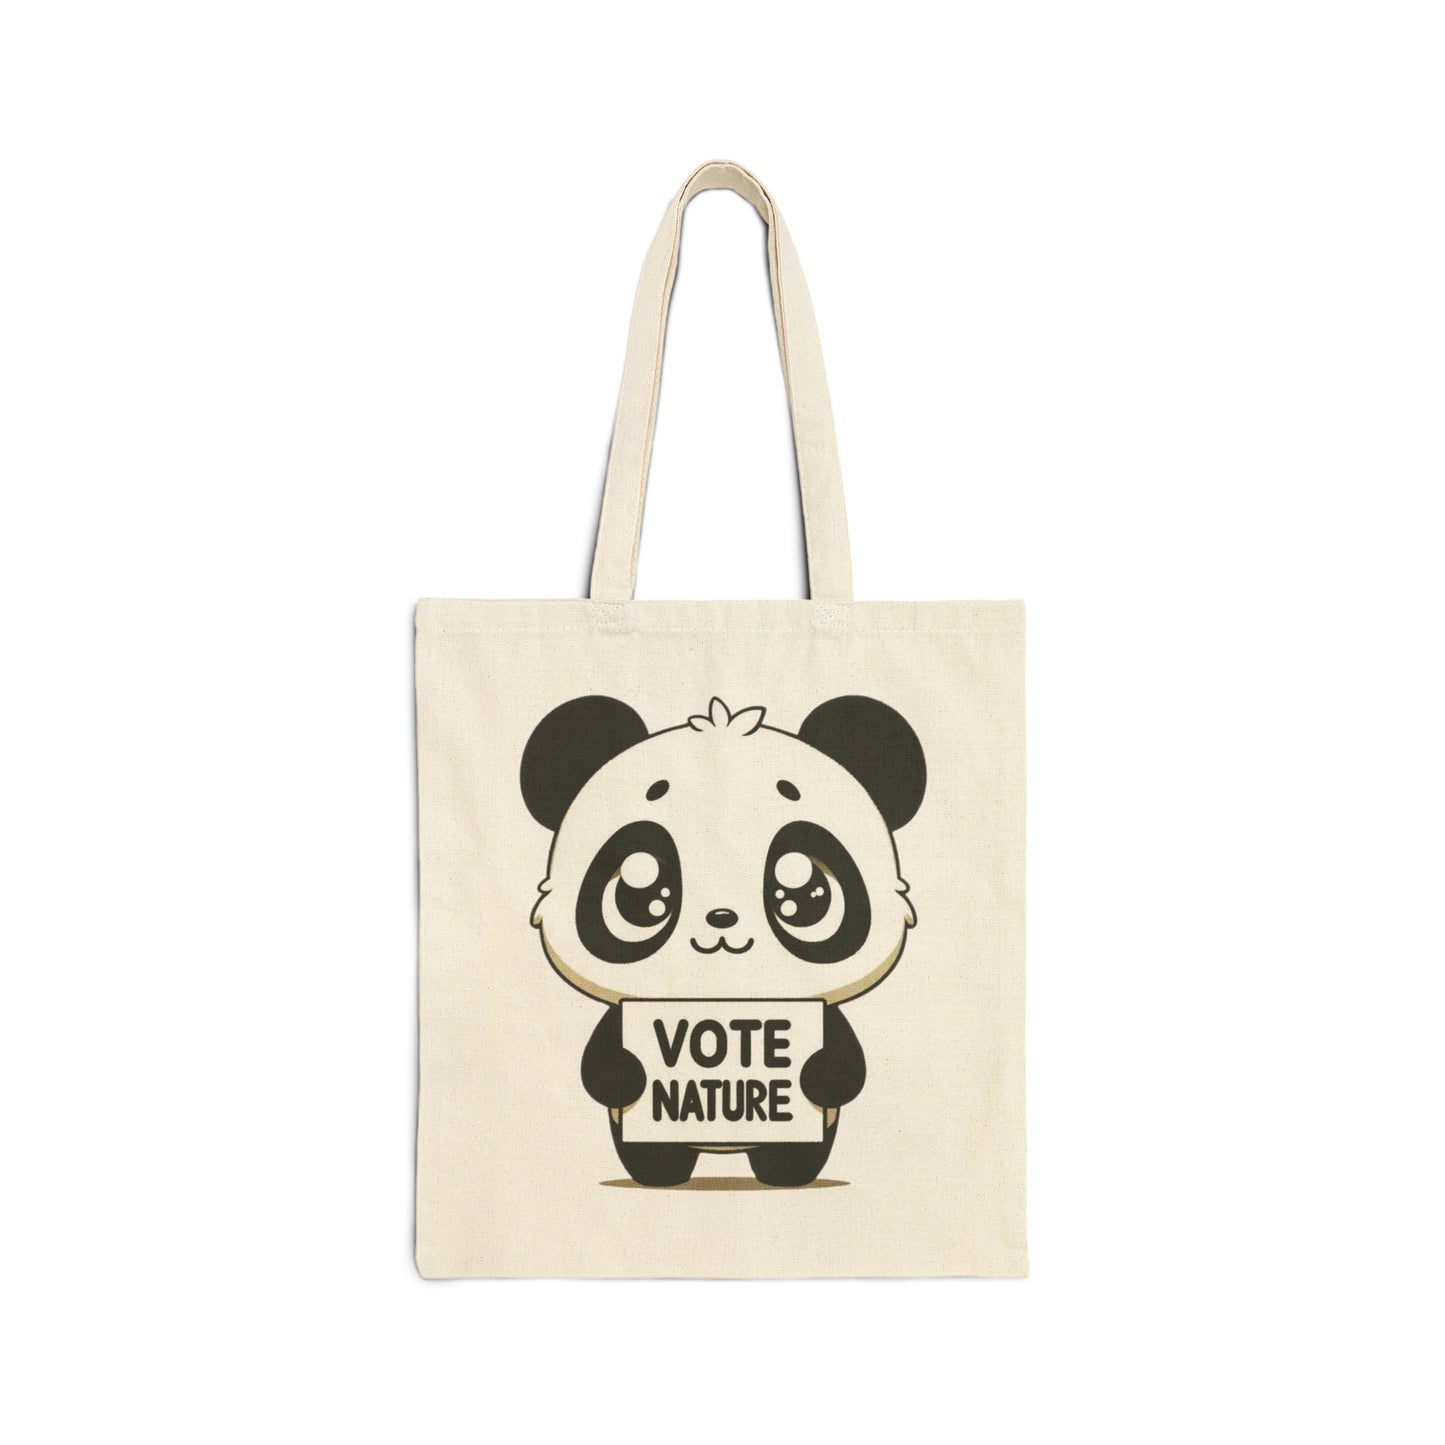 Inspirational Cute Panda Statement Cotton Canvas Tote Bag: Vote Nature! carry a laptop, kindle, phone, notebook, goodies to work/coffee shop